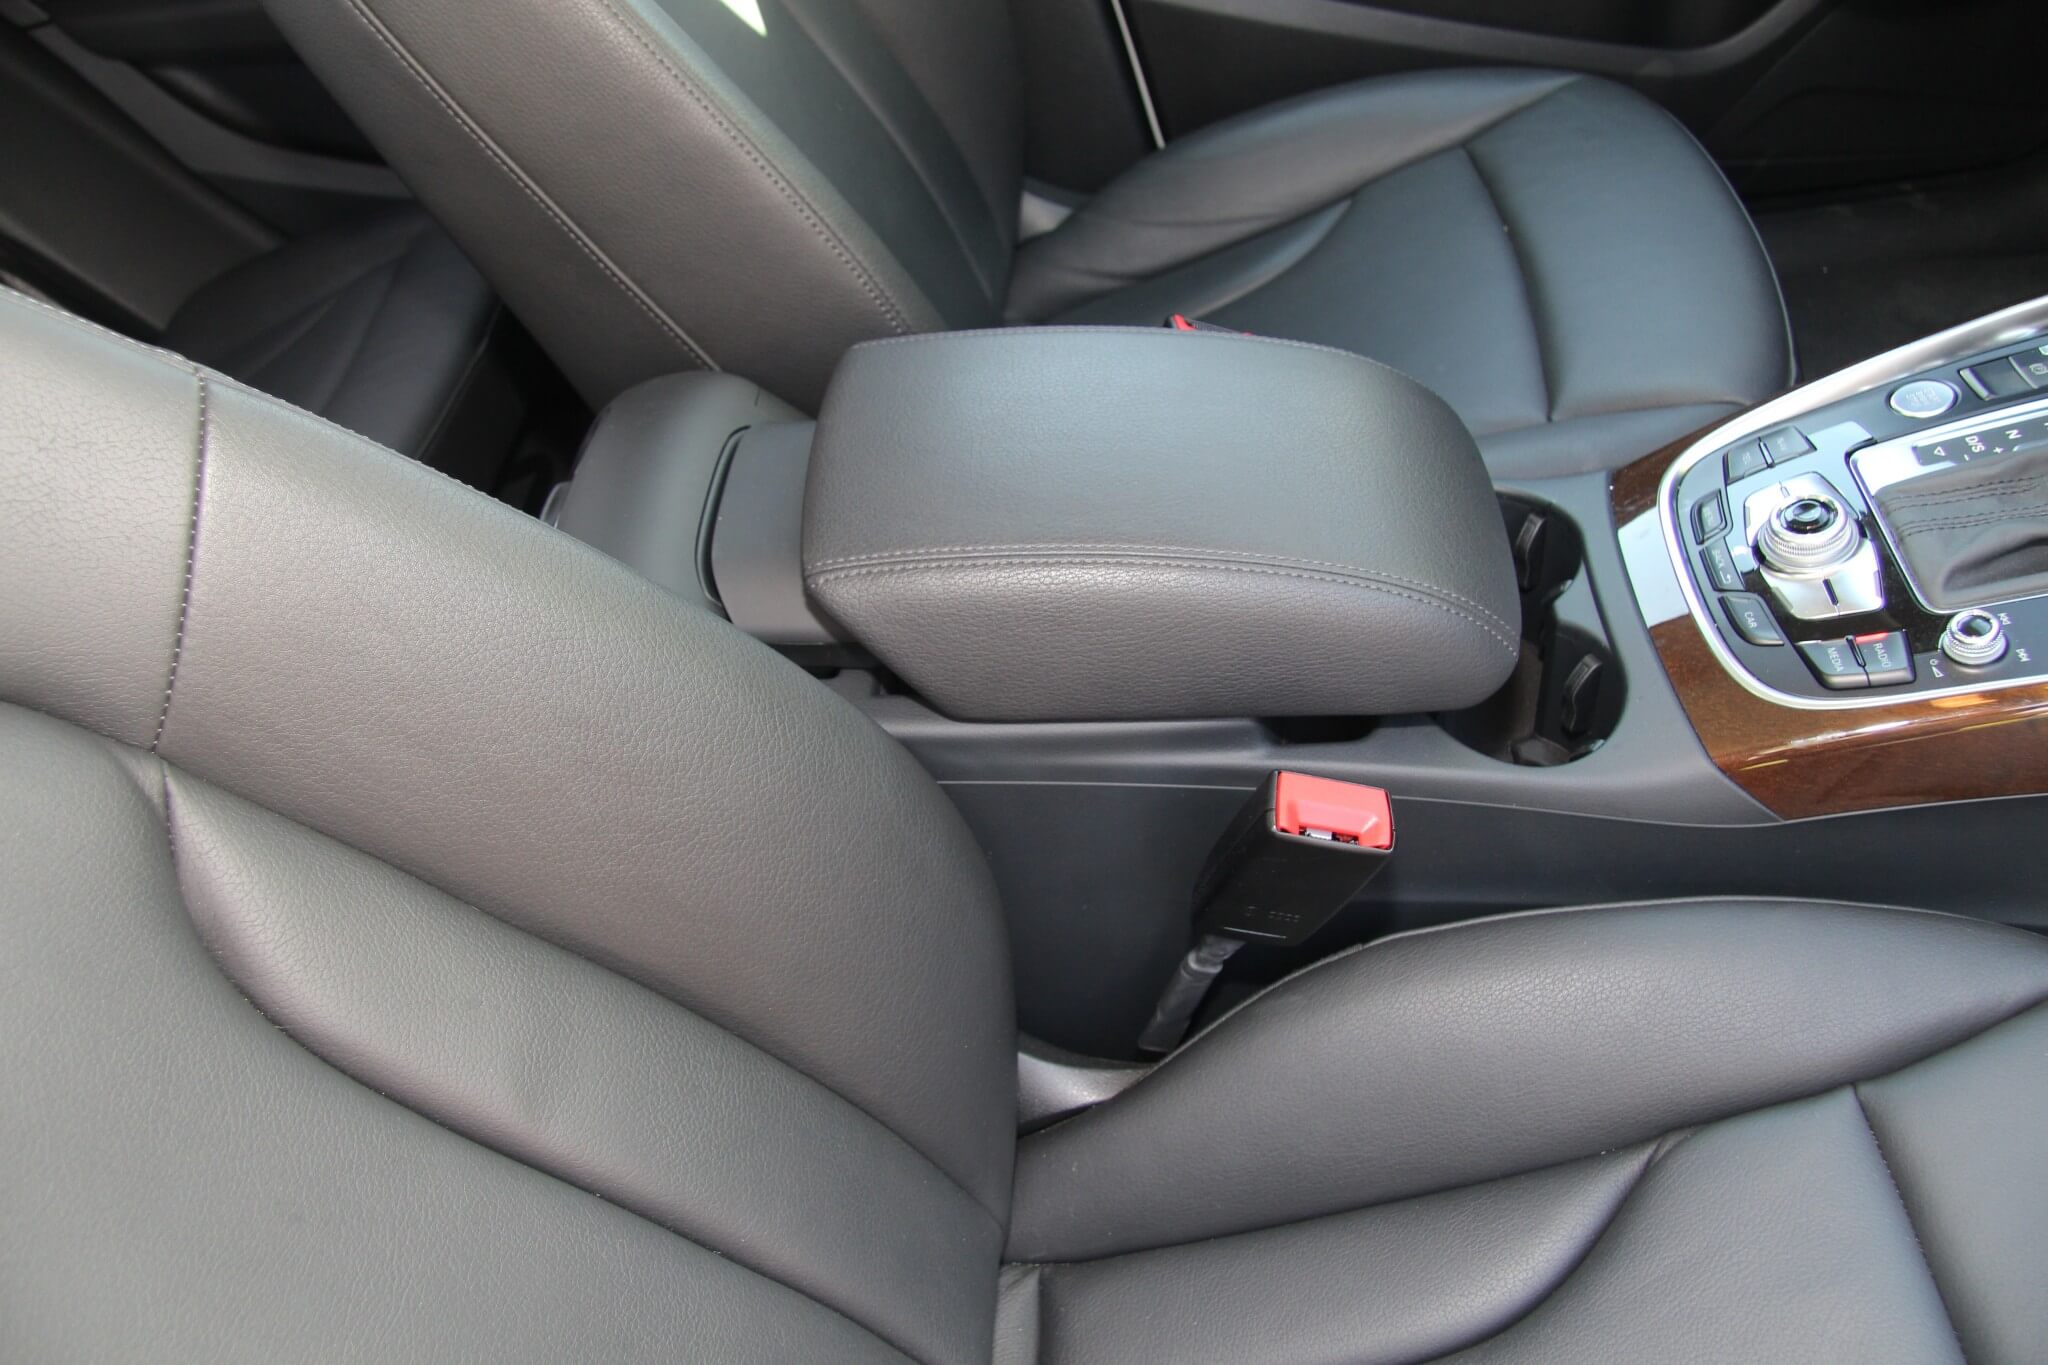 The center console lid can be slid into a forward position, increasing your comfort options in the interior.